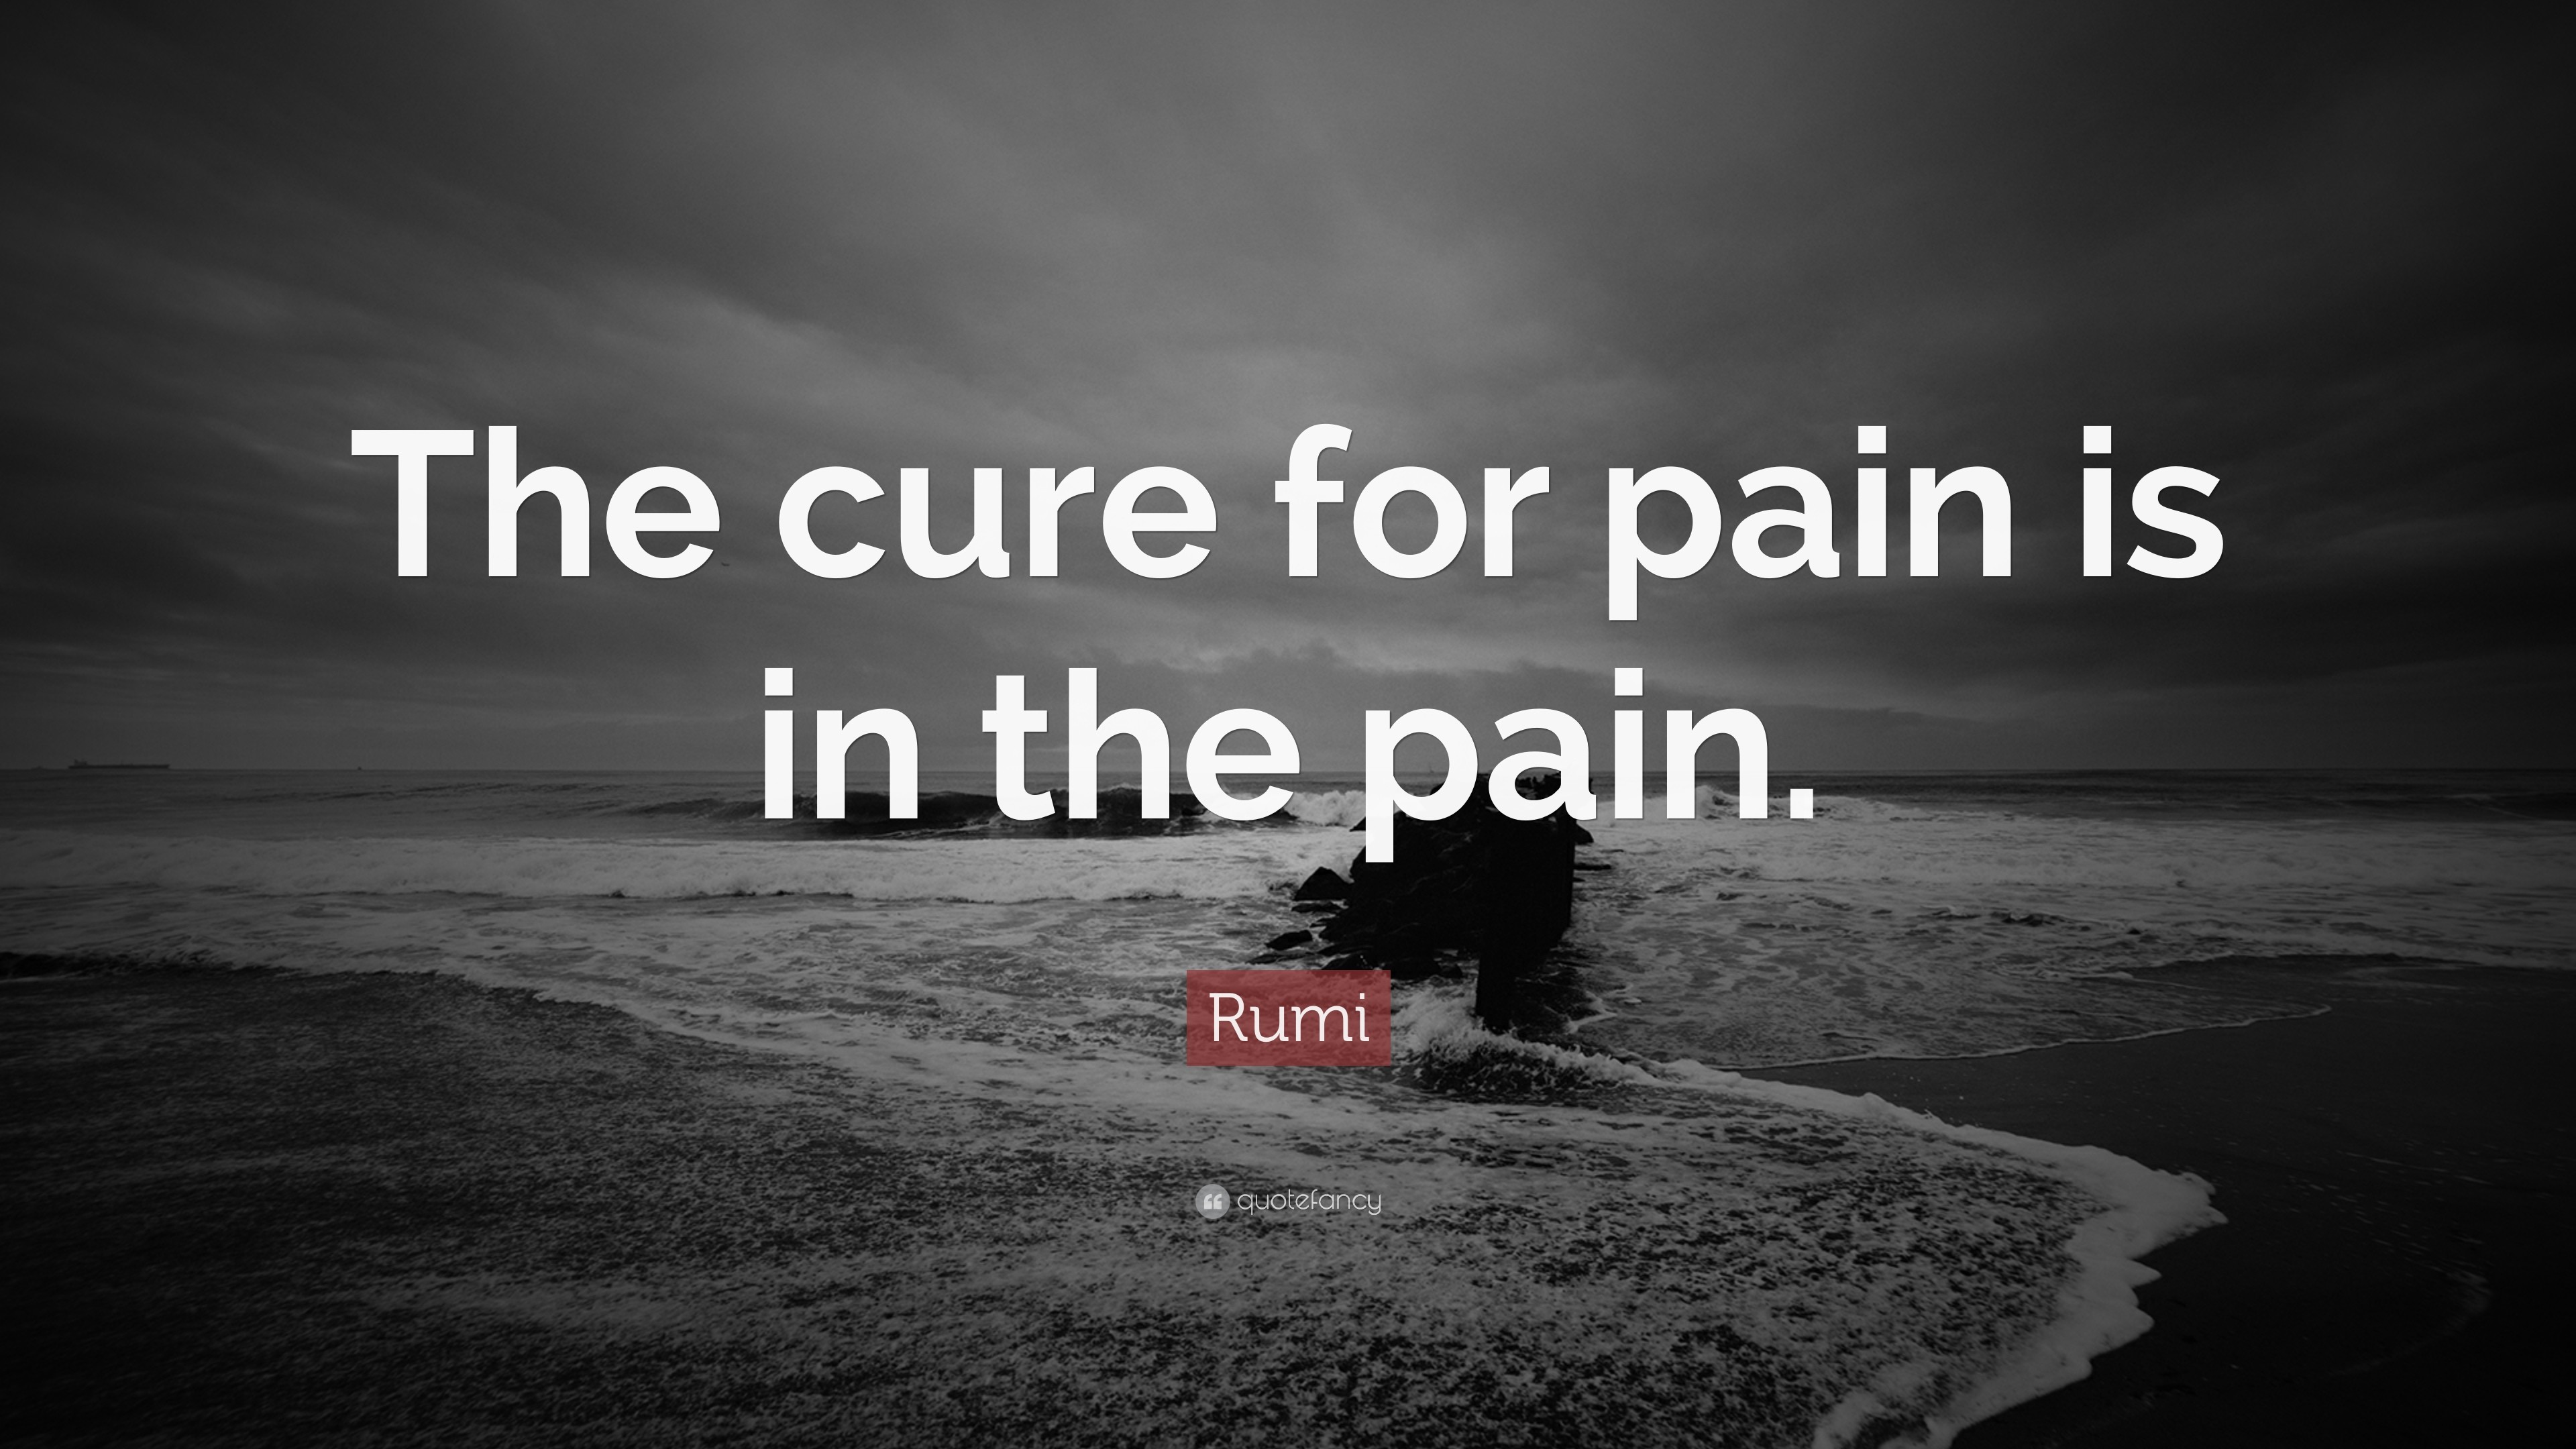 3840x2160 Rumi Quote: “The cure for pain is in the pain.”